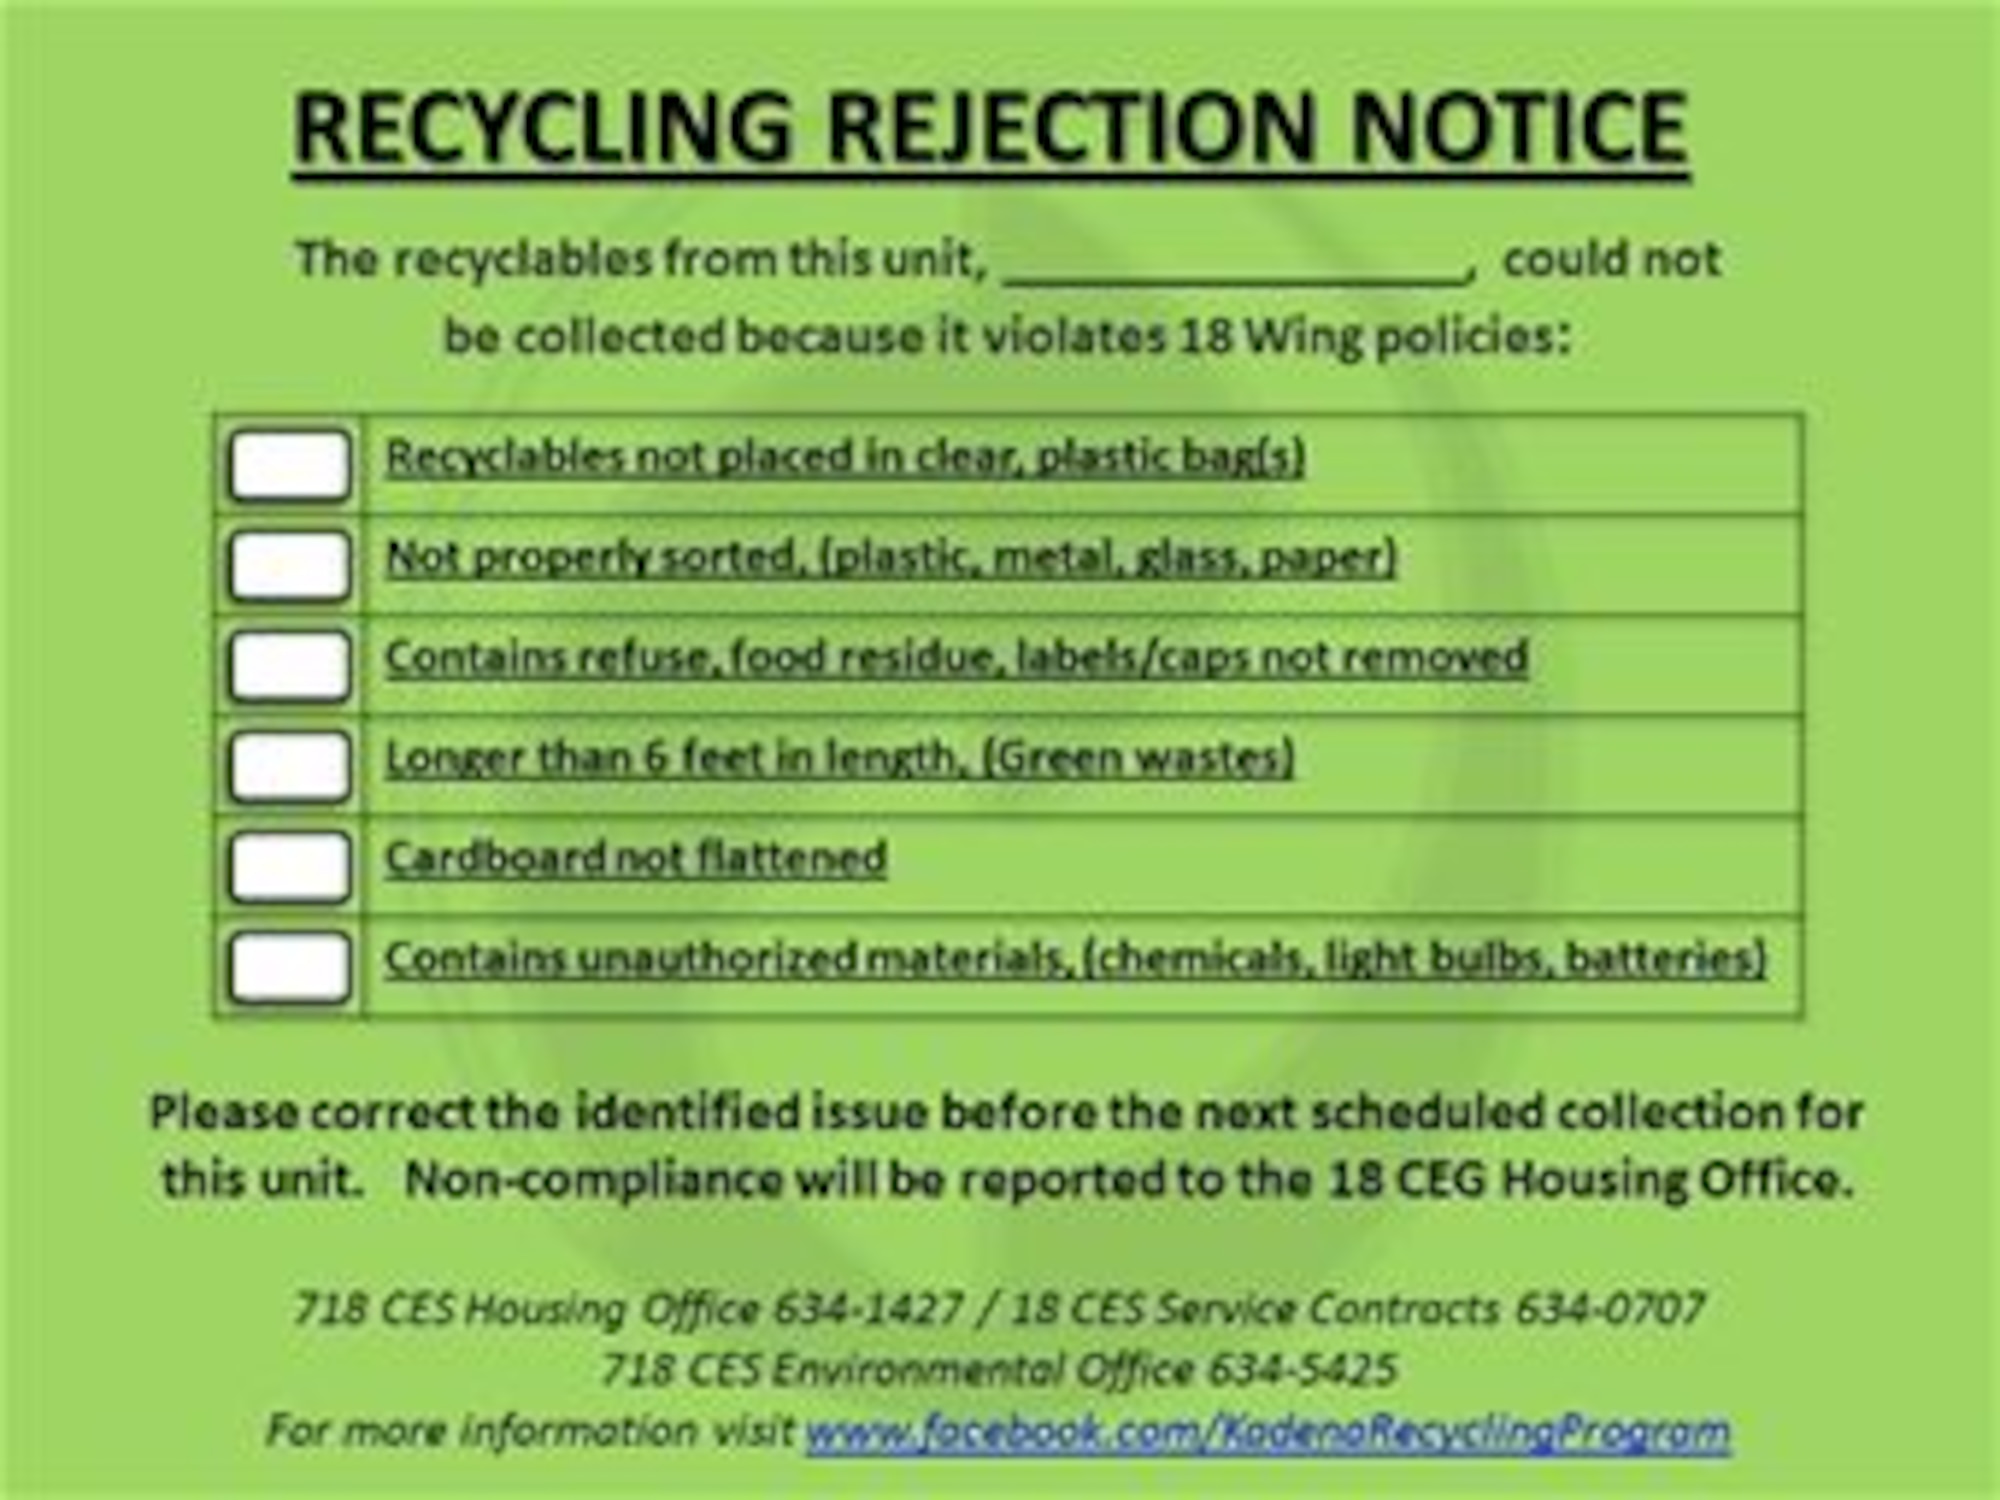 Kadena residents, units reminded to separate recyclables, use clear bags >  Kadena Air Base > News